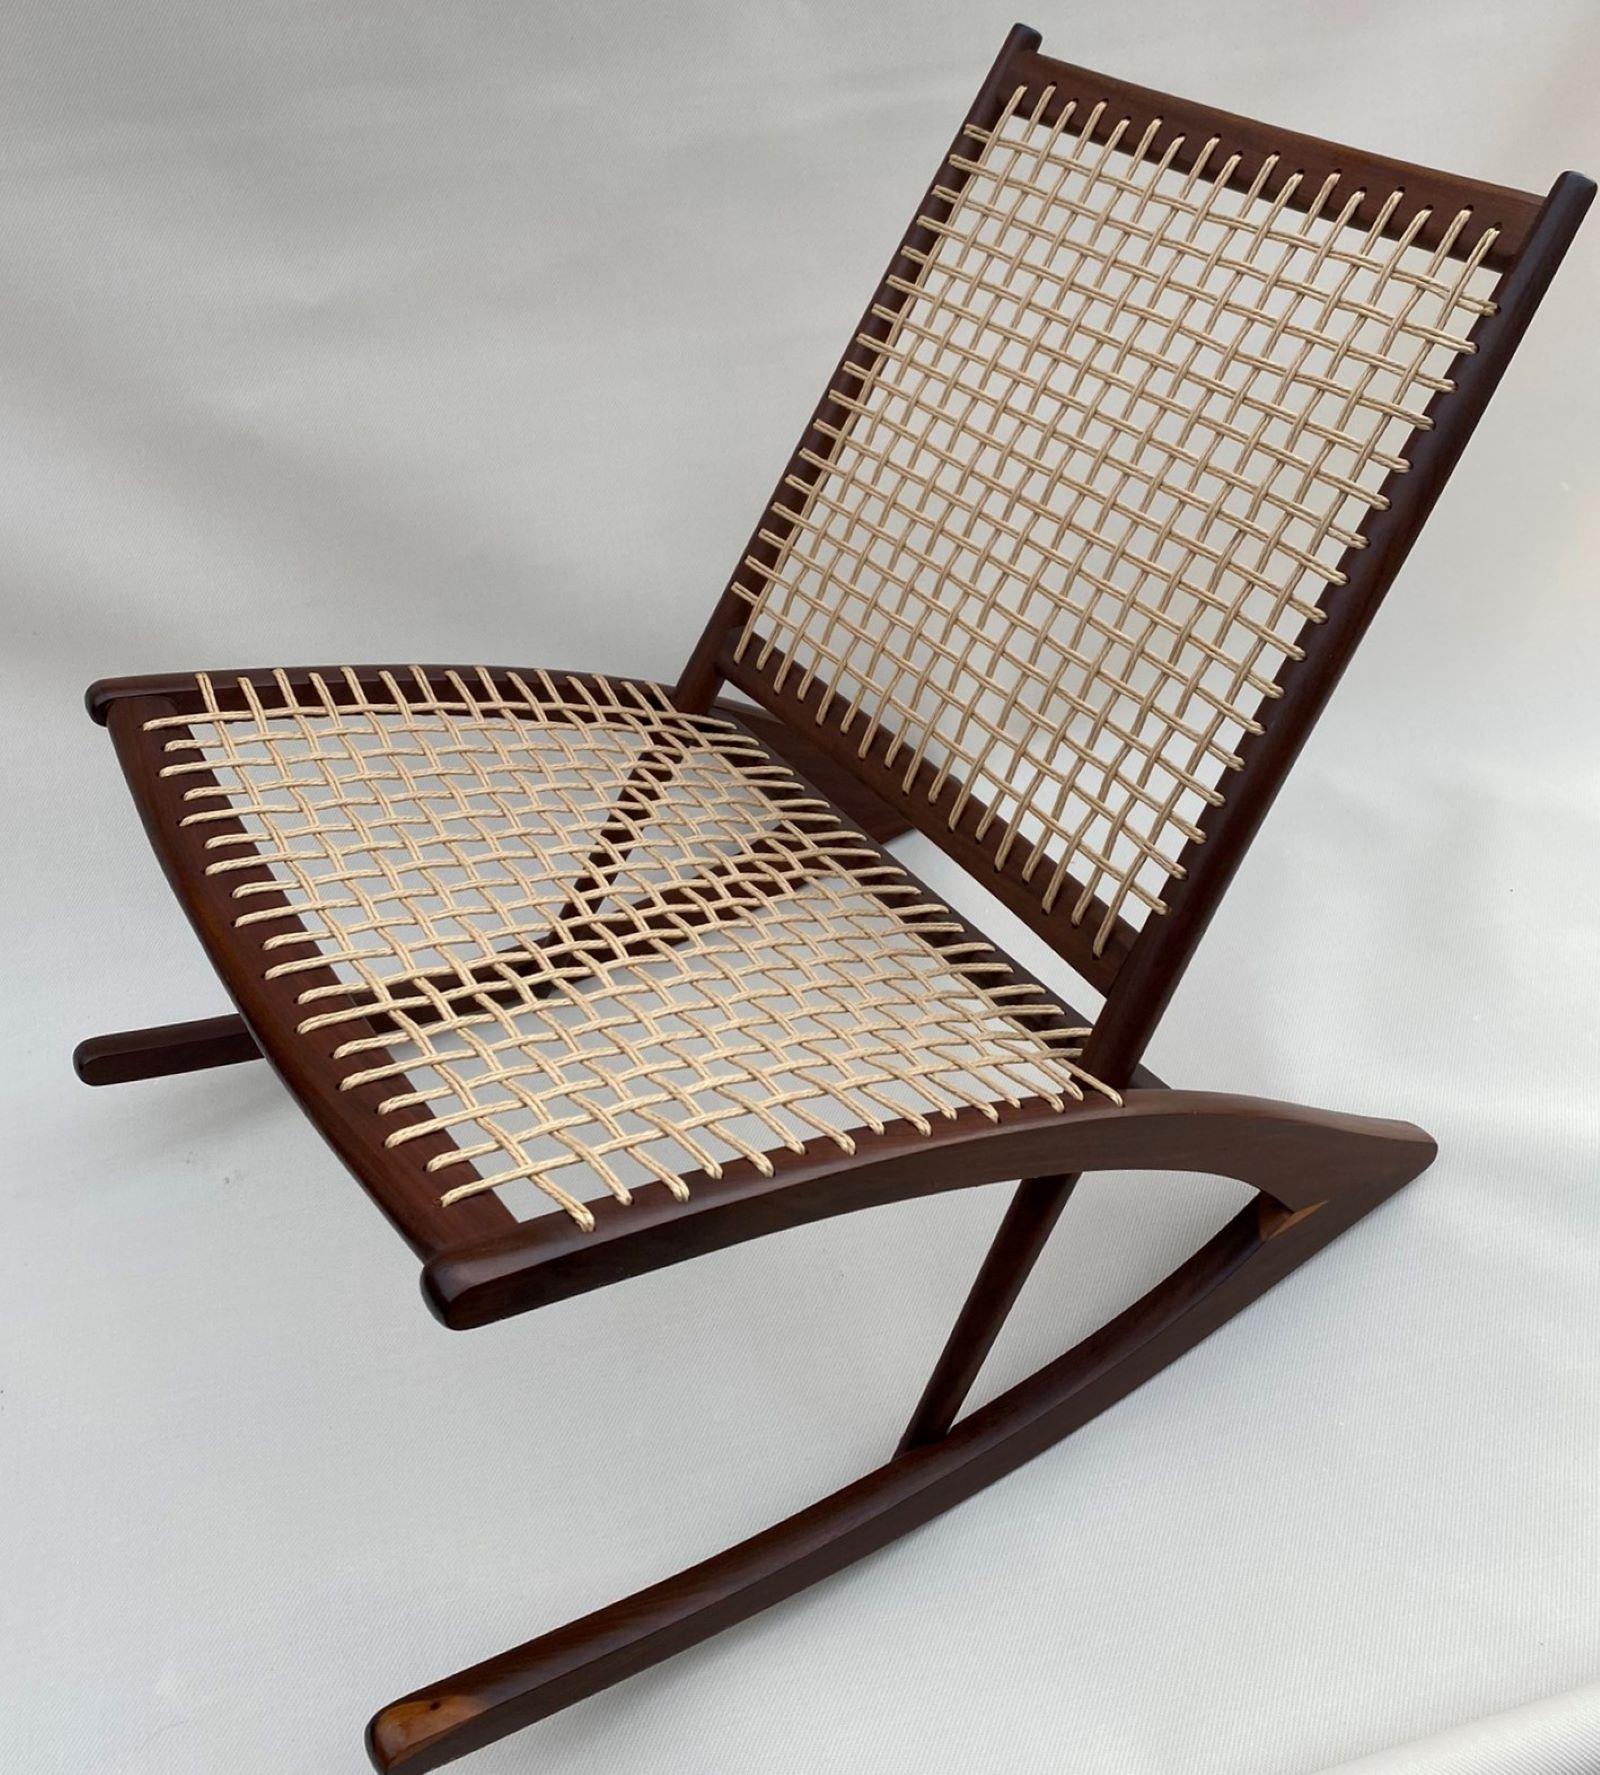 Rare Mid Century Modern Teak Rocking Chair, Frederik Kayser Model 599 By Norway, 1950s

Magnificent mid century modern Frederik Kayser for Vatne Mobler, Model 599 Afromosia teak with cord weave rocking chair, Norway circa 1950s, with woven cord